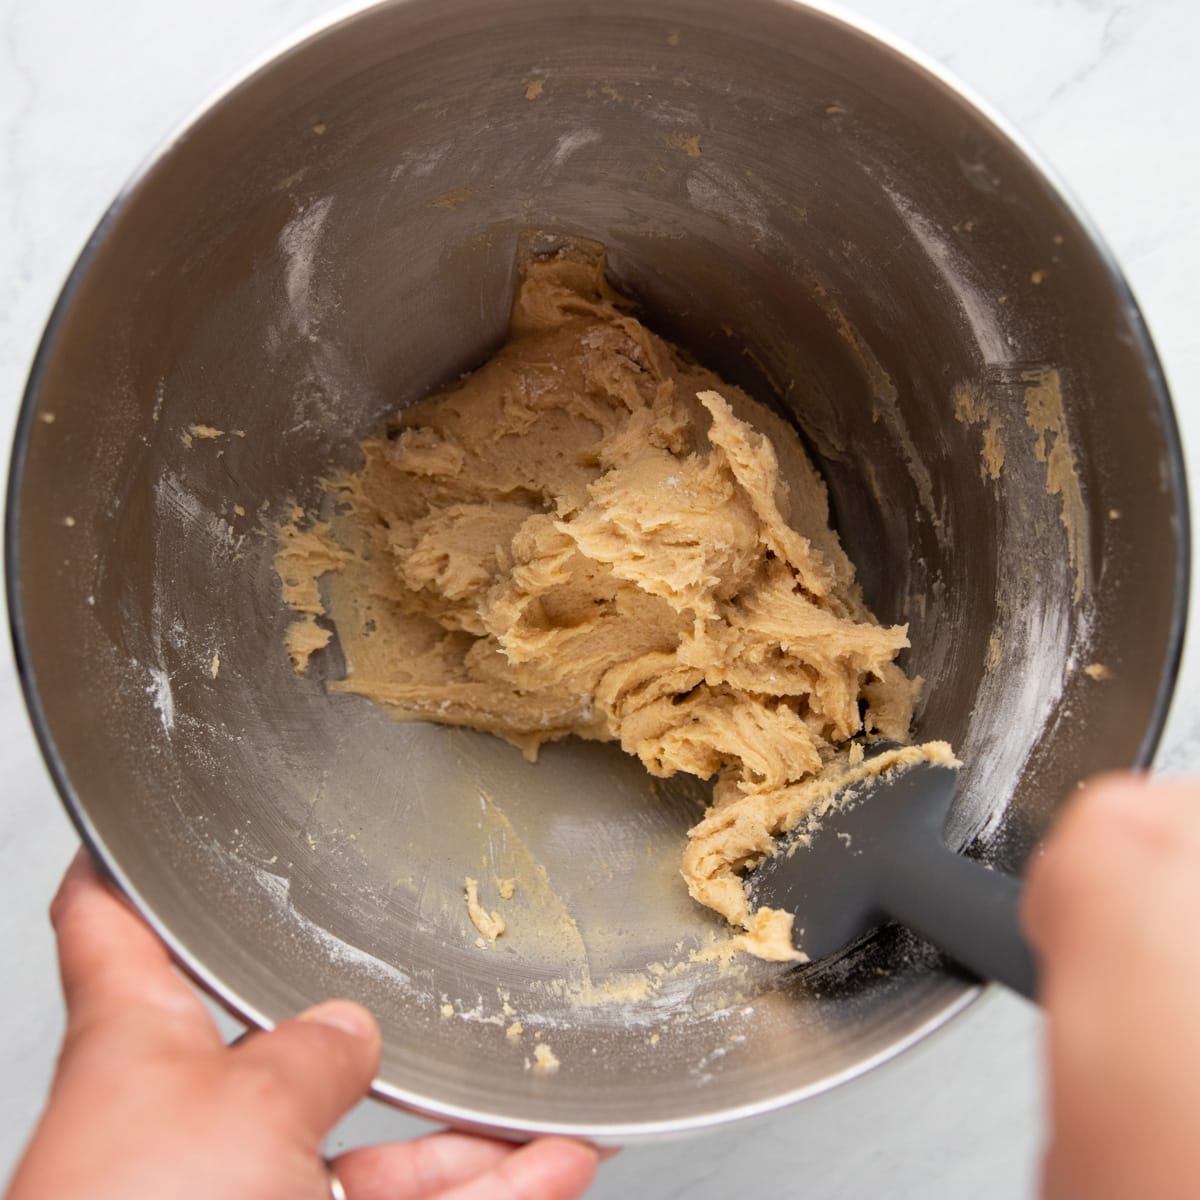 Scraping the sides of a mixing bowl filled with cookie dough.